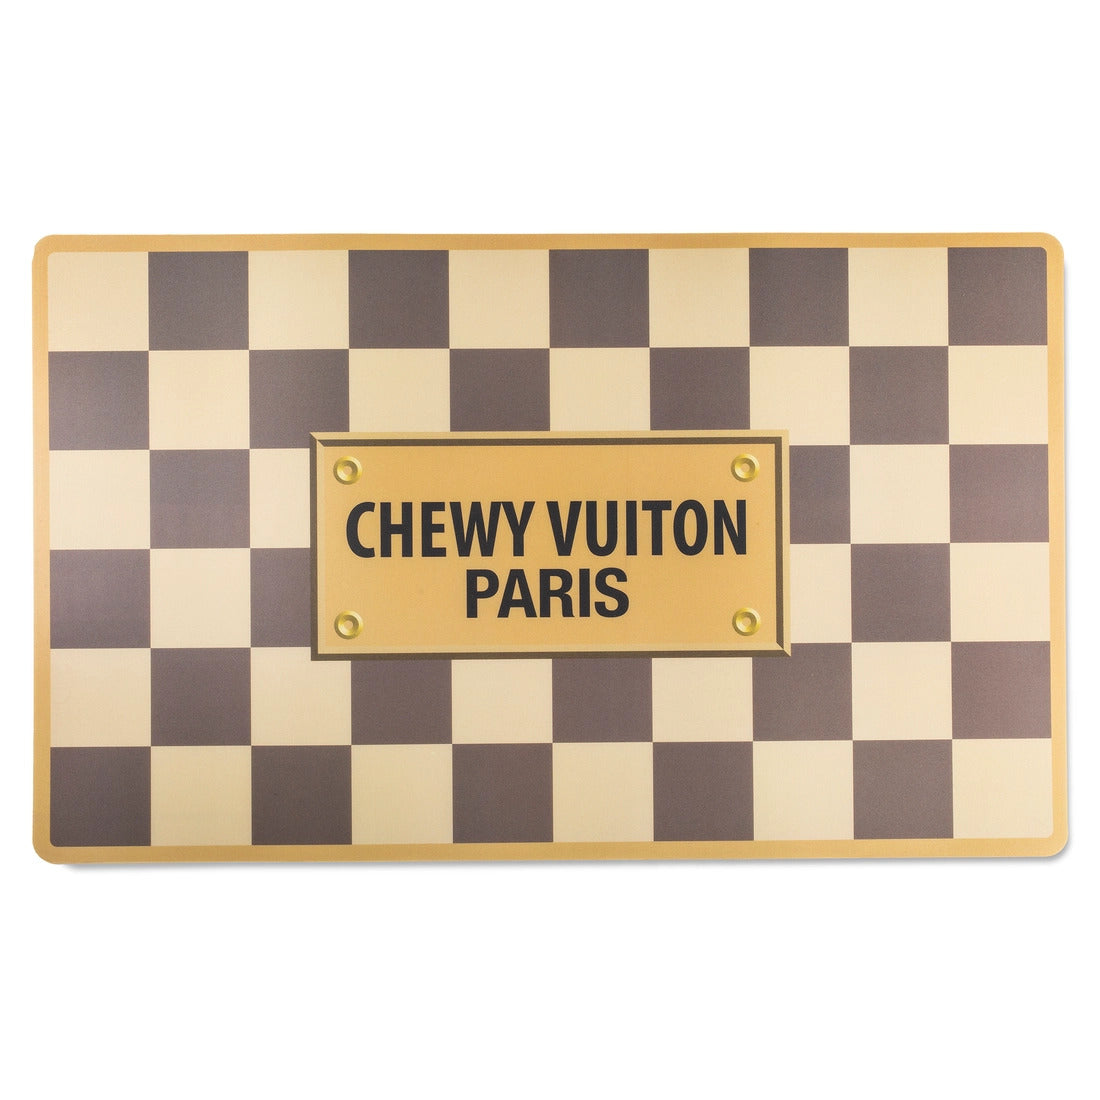 Chewy Vuiton Placemat - Ruitje